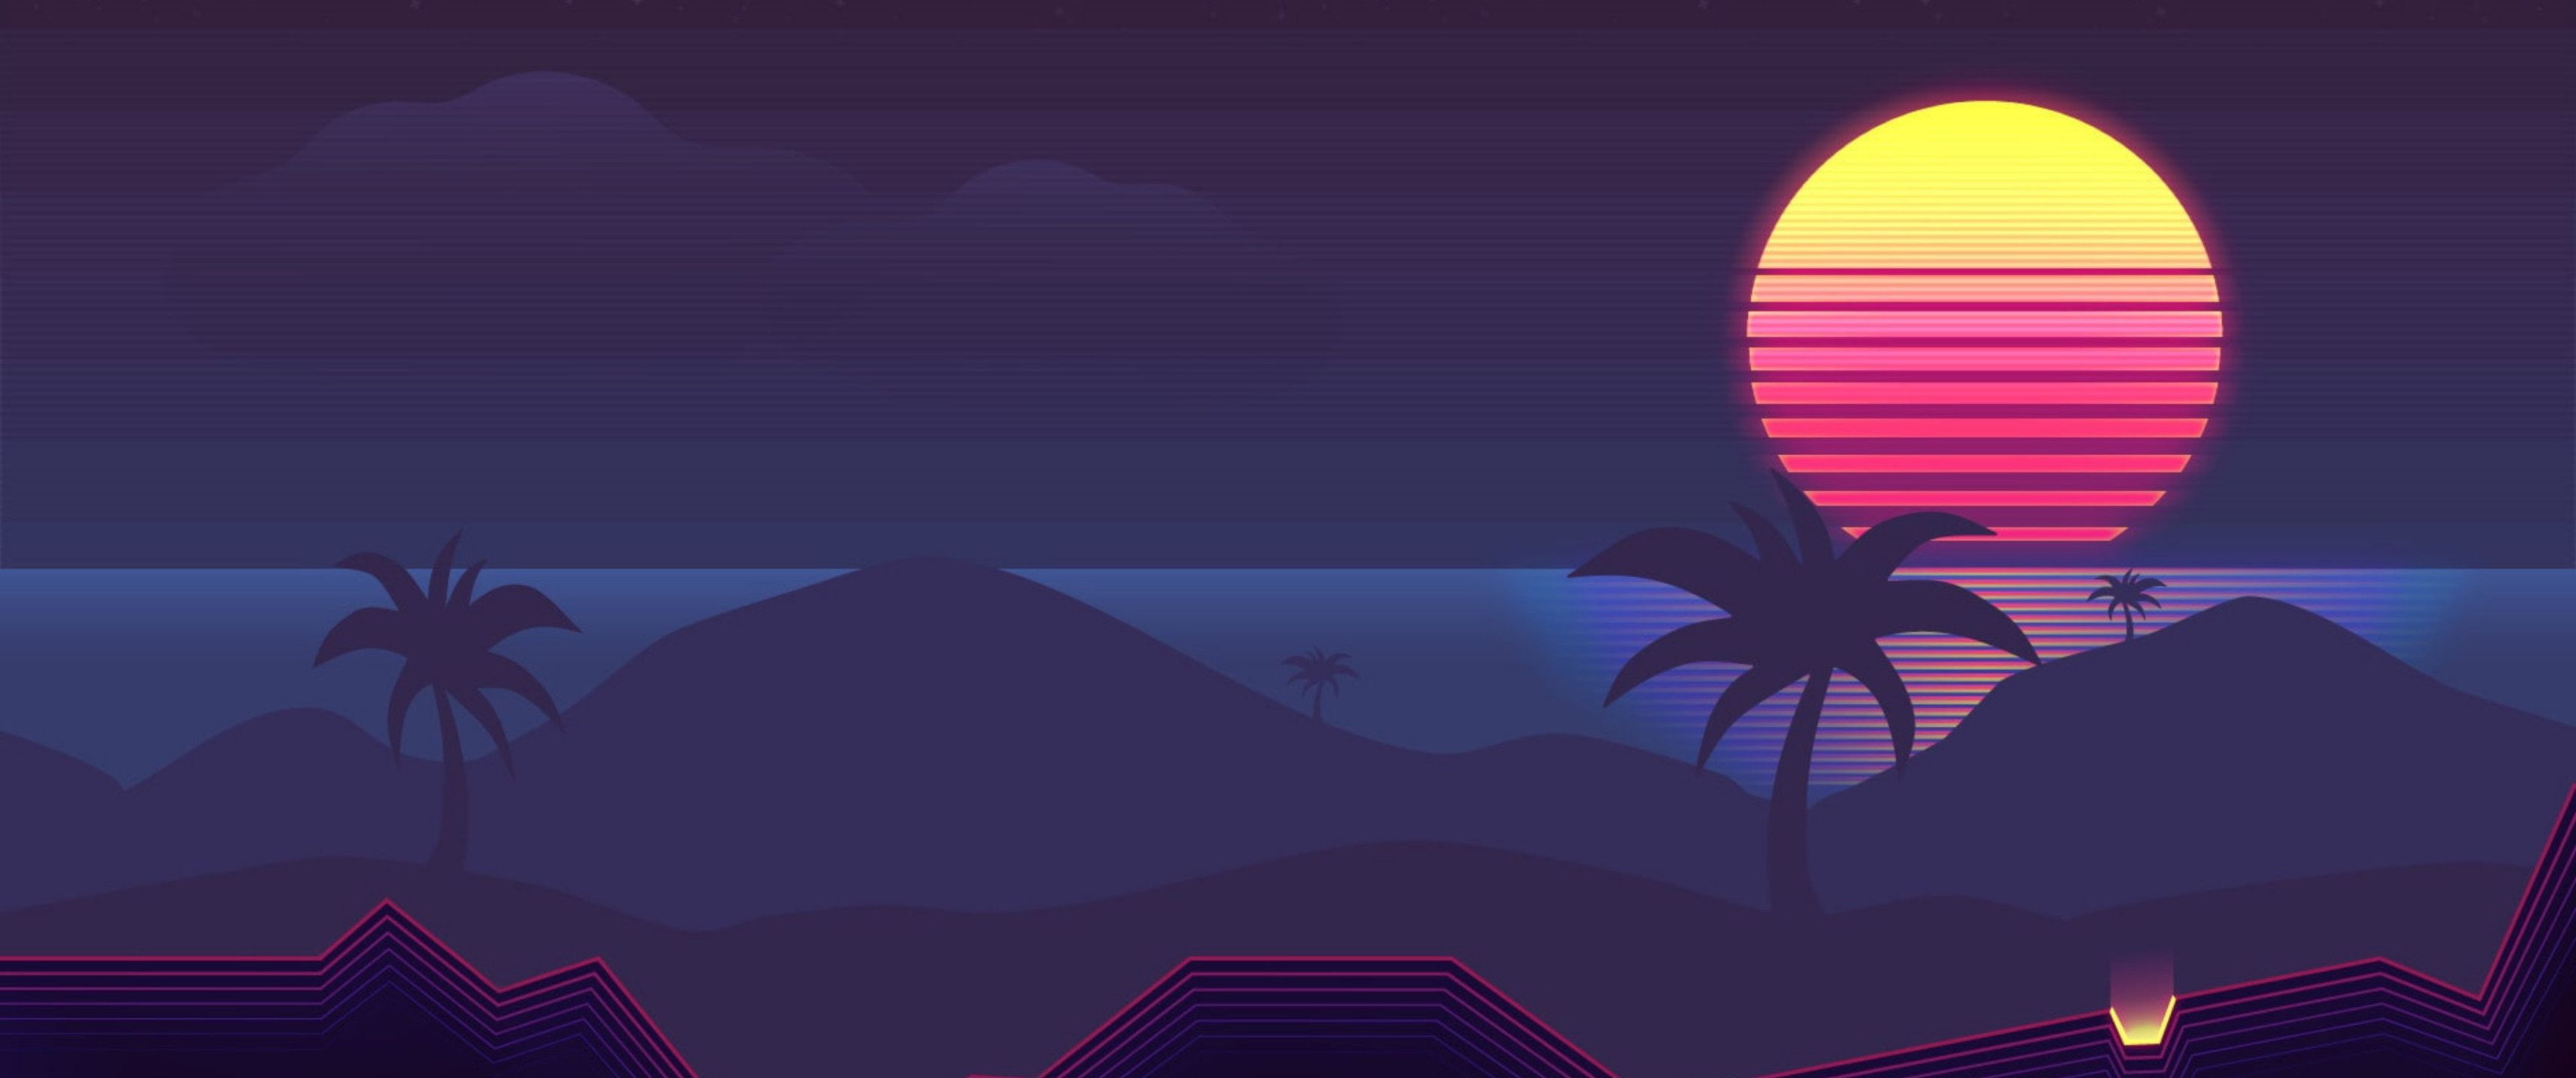 Synthwave 4k 3440x1440 Resolution Wallpaper, HD Artist 4K Wallpaper, Image, Photo and Background